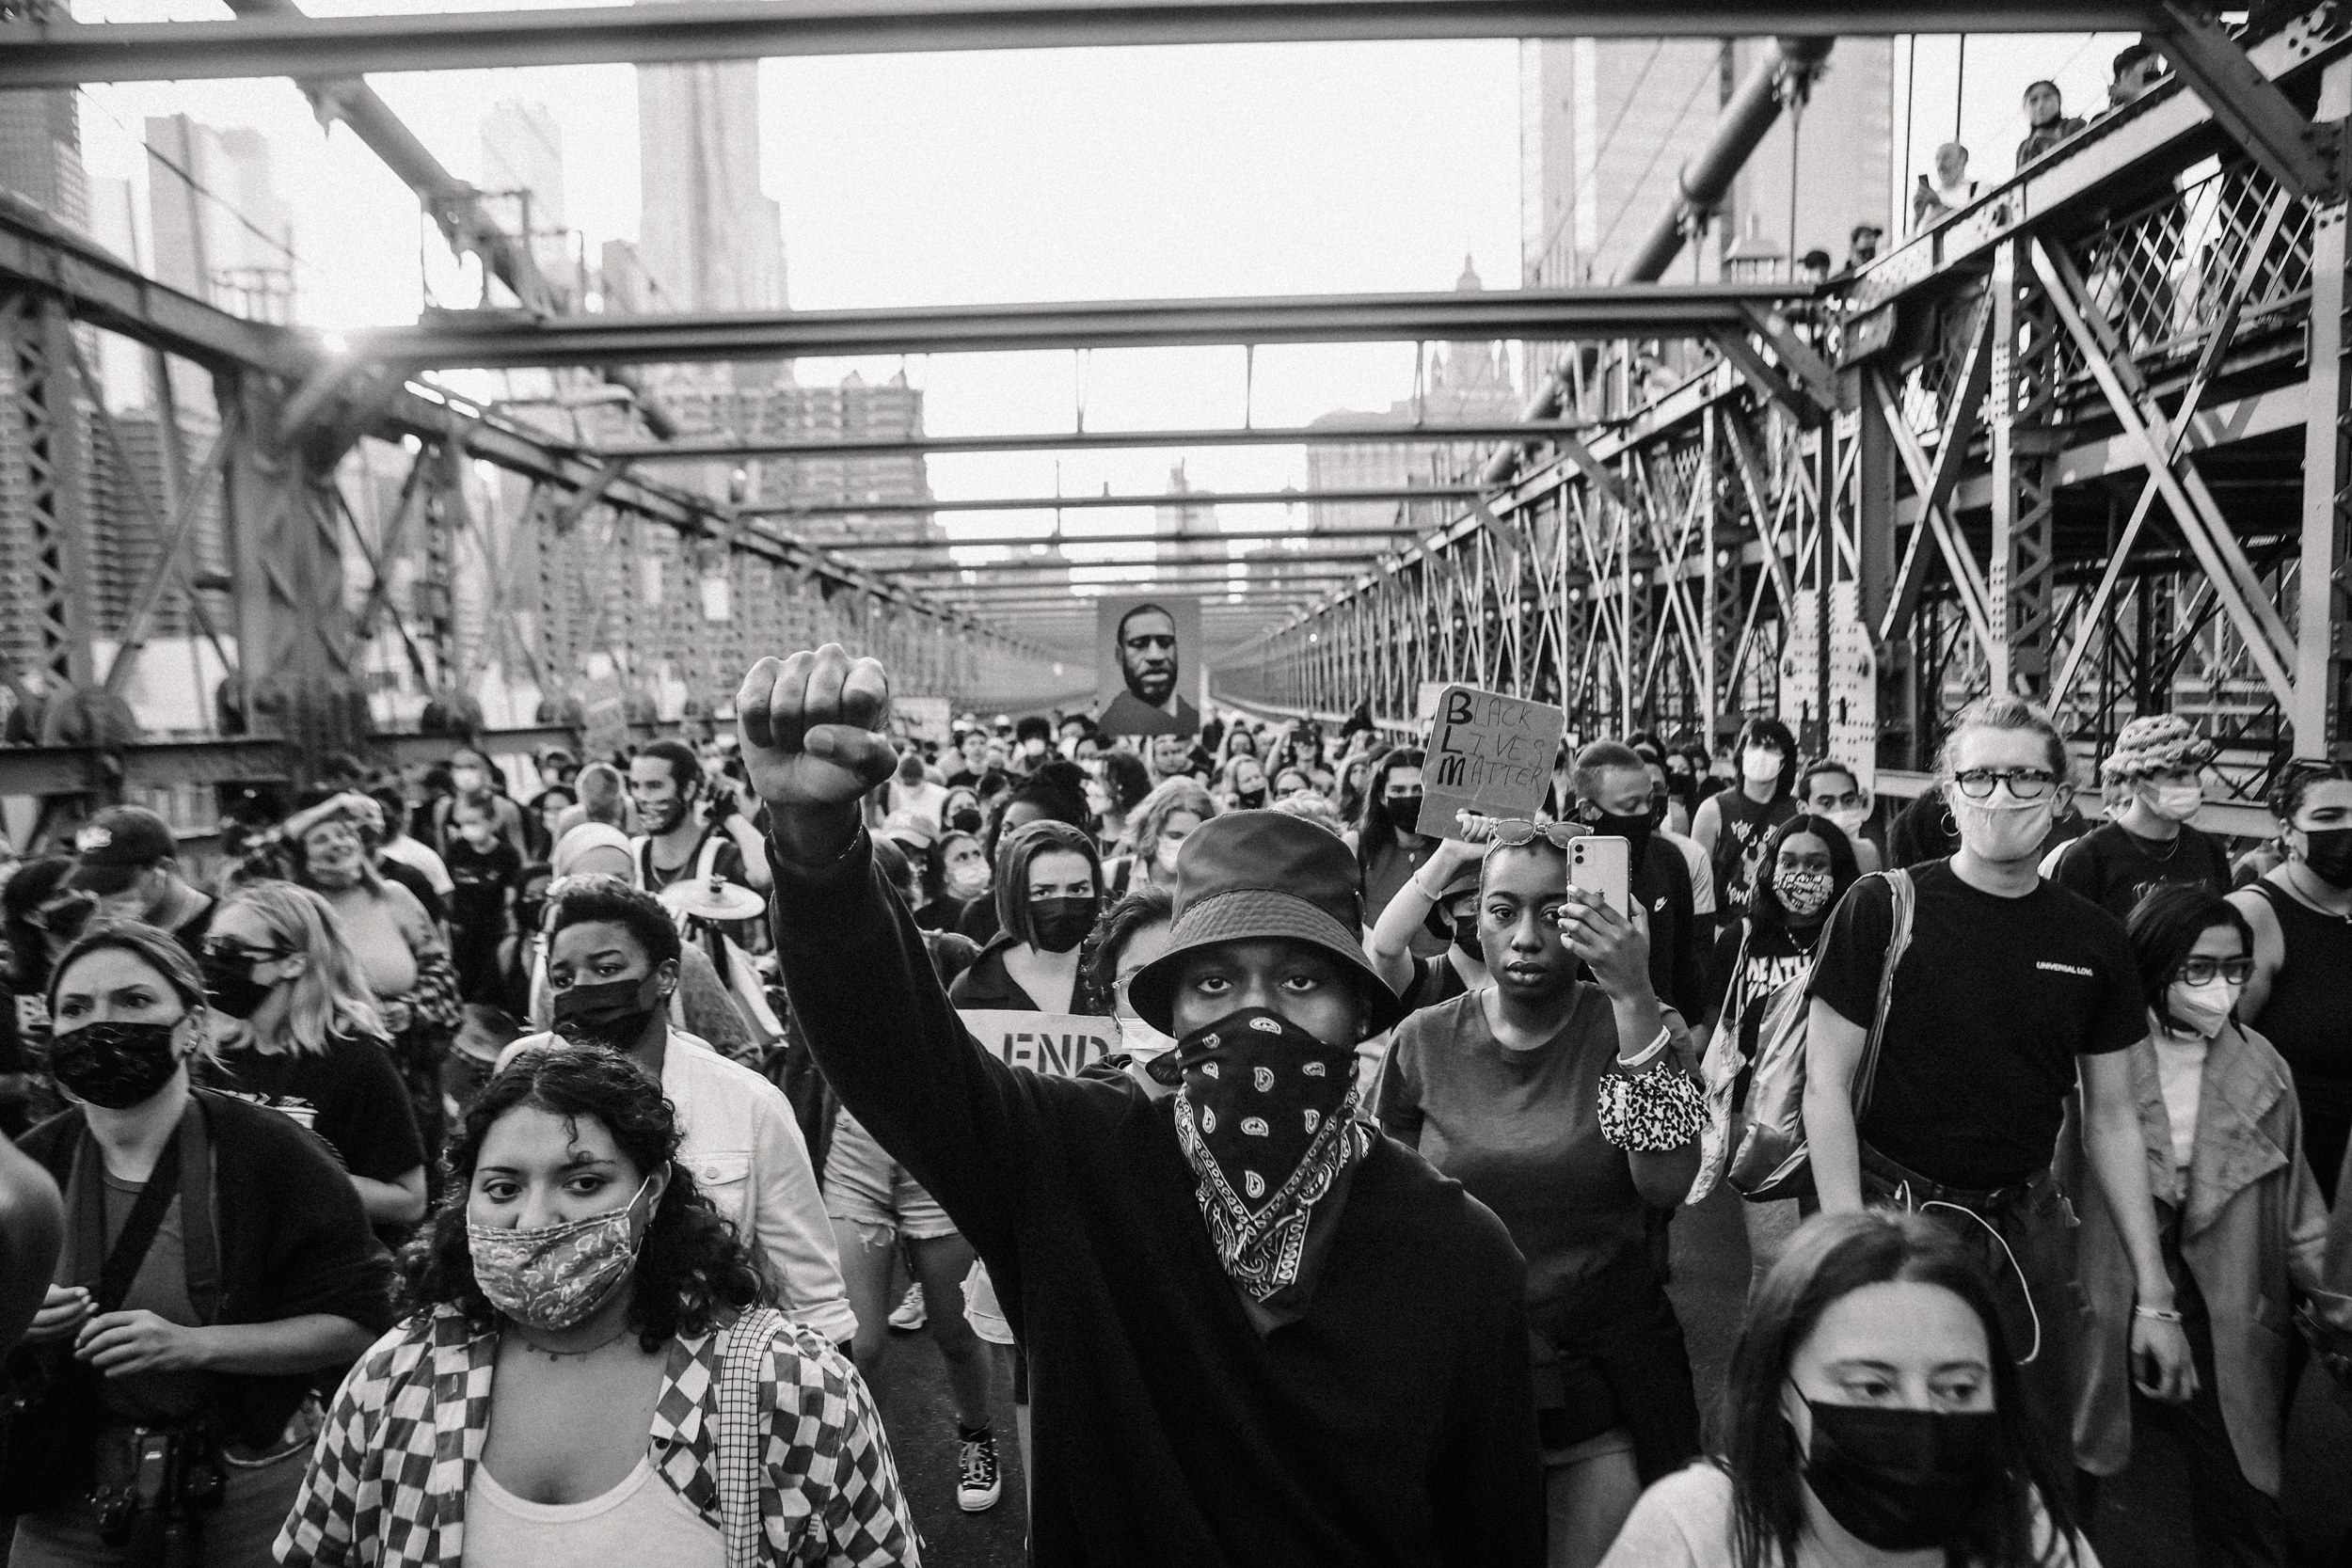 A crowd of protestors wearing masks and with their phones and fists up cross the Brooklyn Bridge in New York